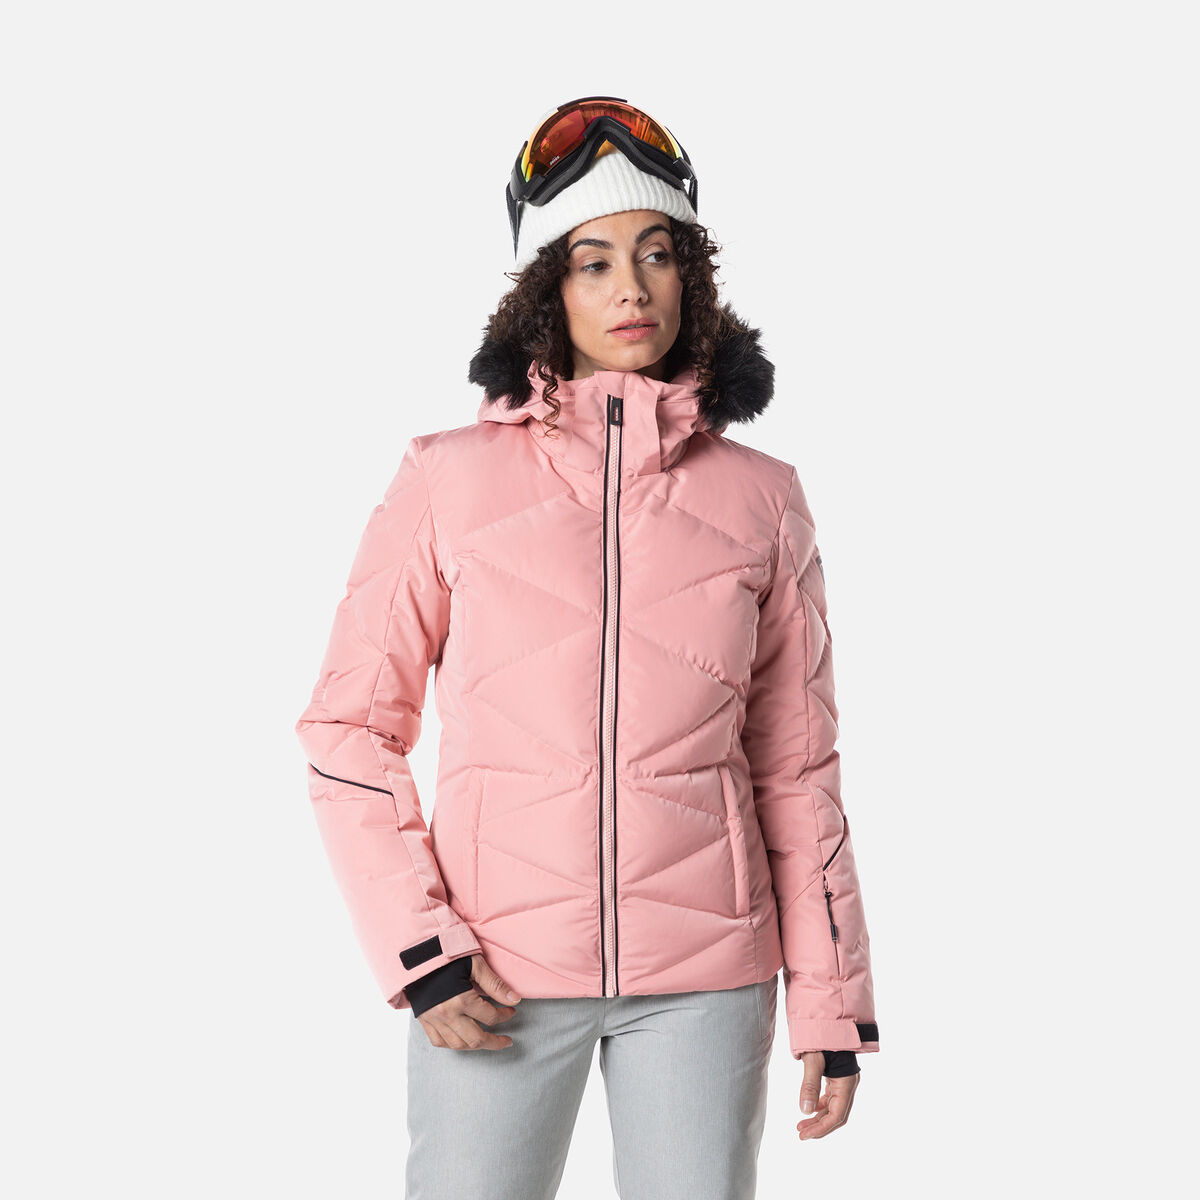 Women's Staci Pearly Ski Jacket | Outlet selection | Rossignol